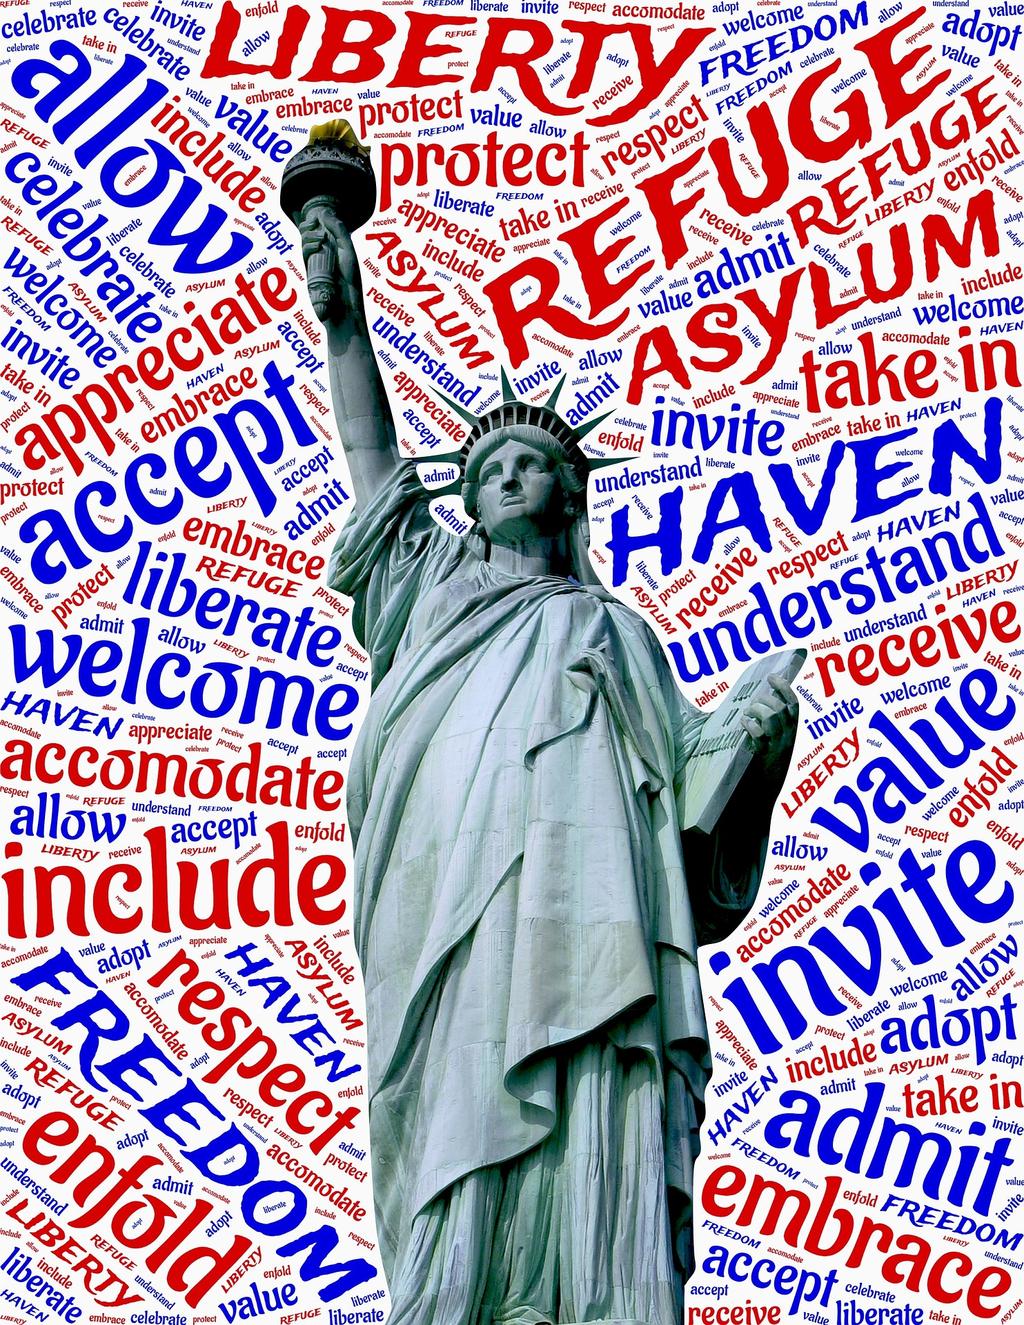 COMMON SOURCES OF ASYLUM LAW International Law (UN Conventions, Treaties; Convention Against Torture important) Immigration and Nationality Act ( INA ) 208 or US Code (8 U.S.C. 1158) Refugee Act of 1980 Illegal Immigration Reform and Immigrant Responsibility Act U.